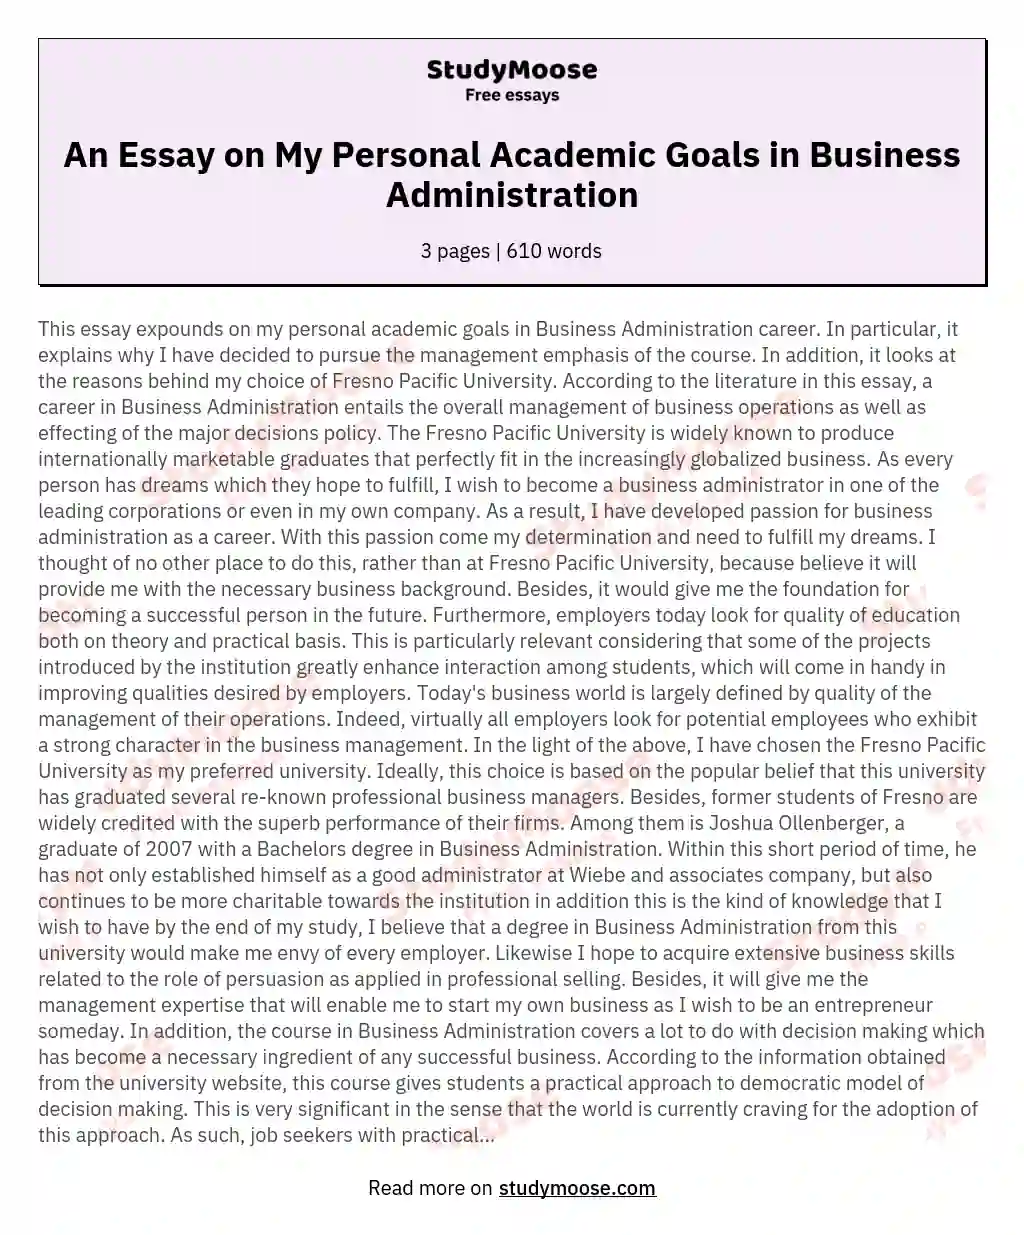 An Essay on My Personal Academic Goals in Business Administration essay